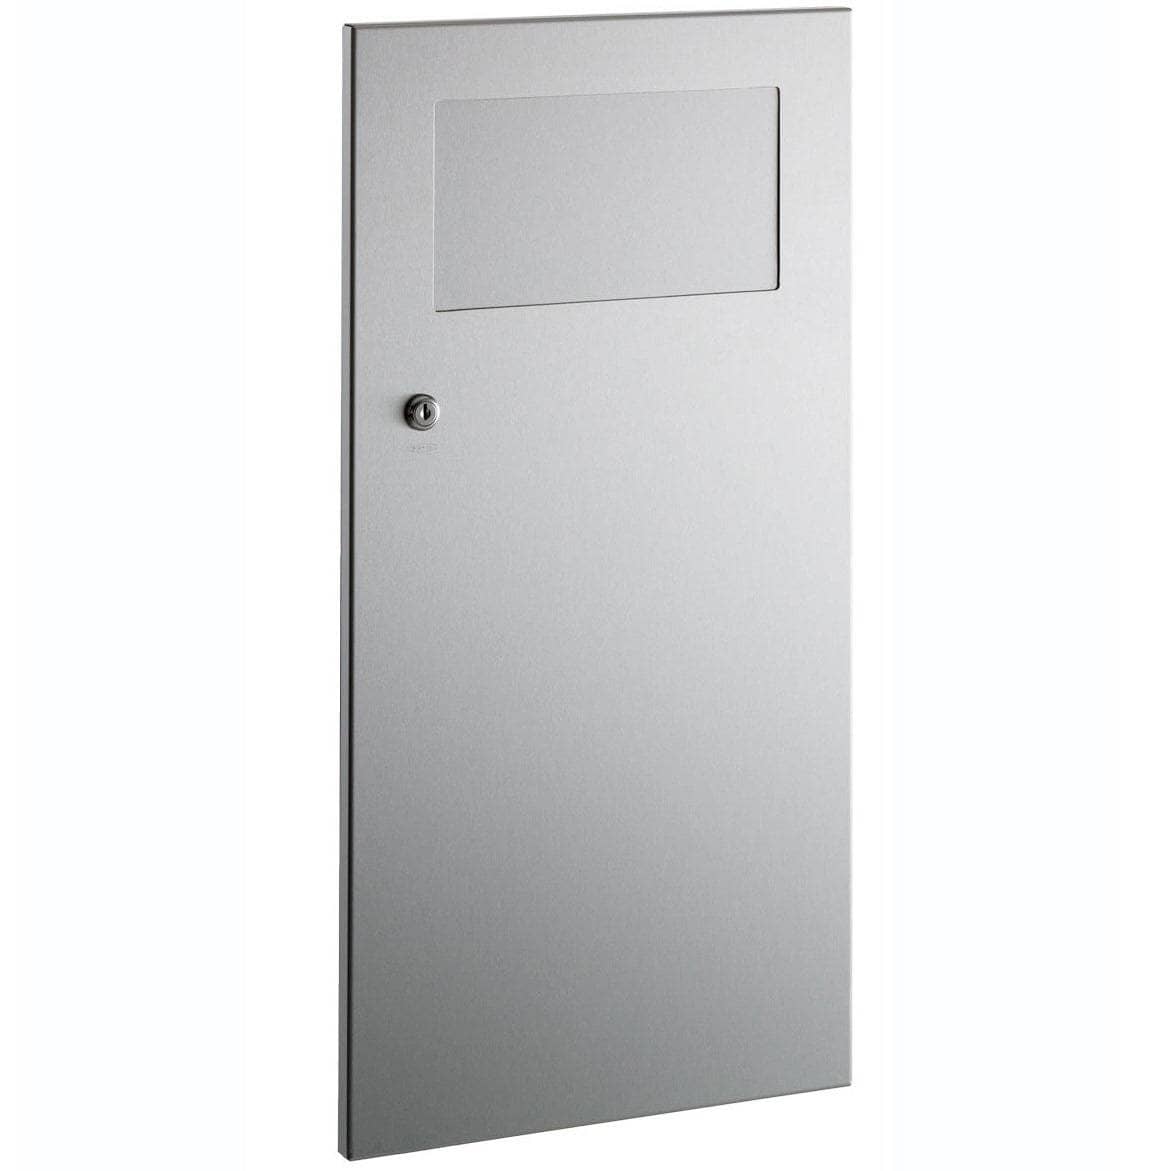 Bobrick B-35633 Commercial Restroom Sanitary Waste Bin, 11 L, Recessed-Mounted, 14-1/8